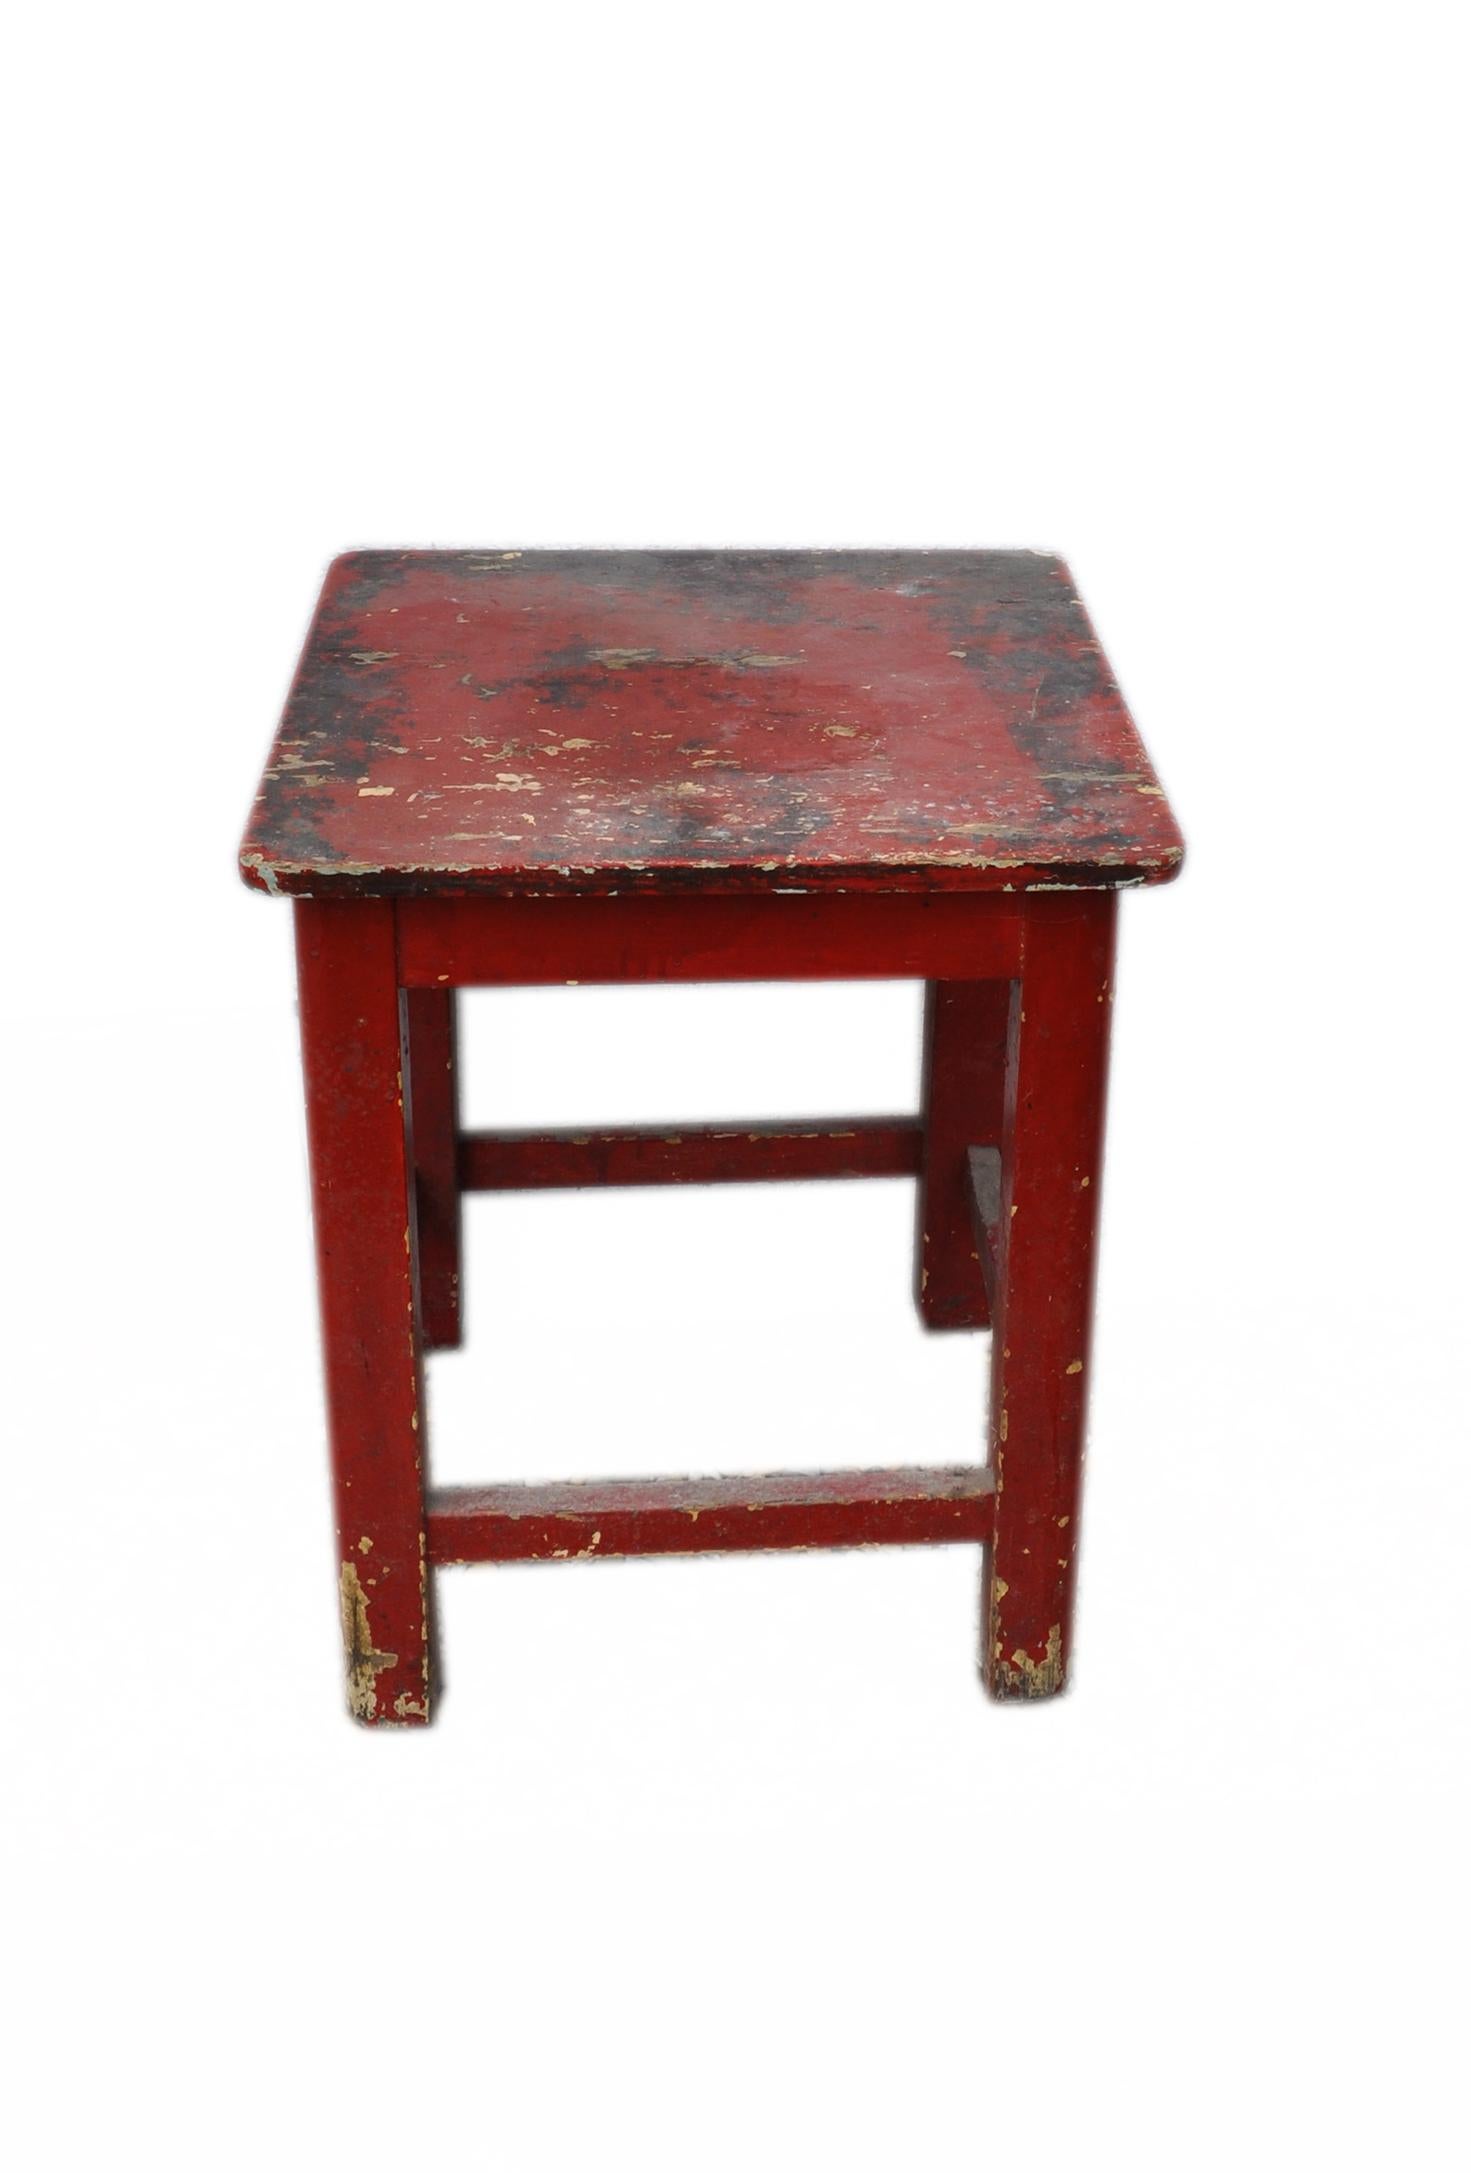 Painted Red Pine Kitchen Stool, circa 1920s (Rustikal)